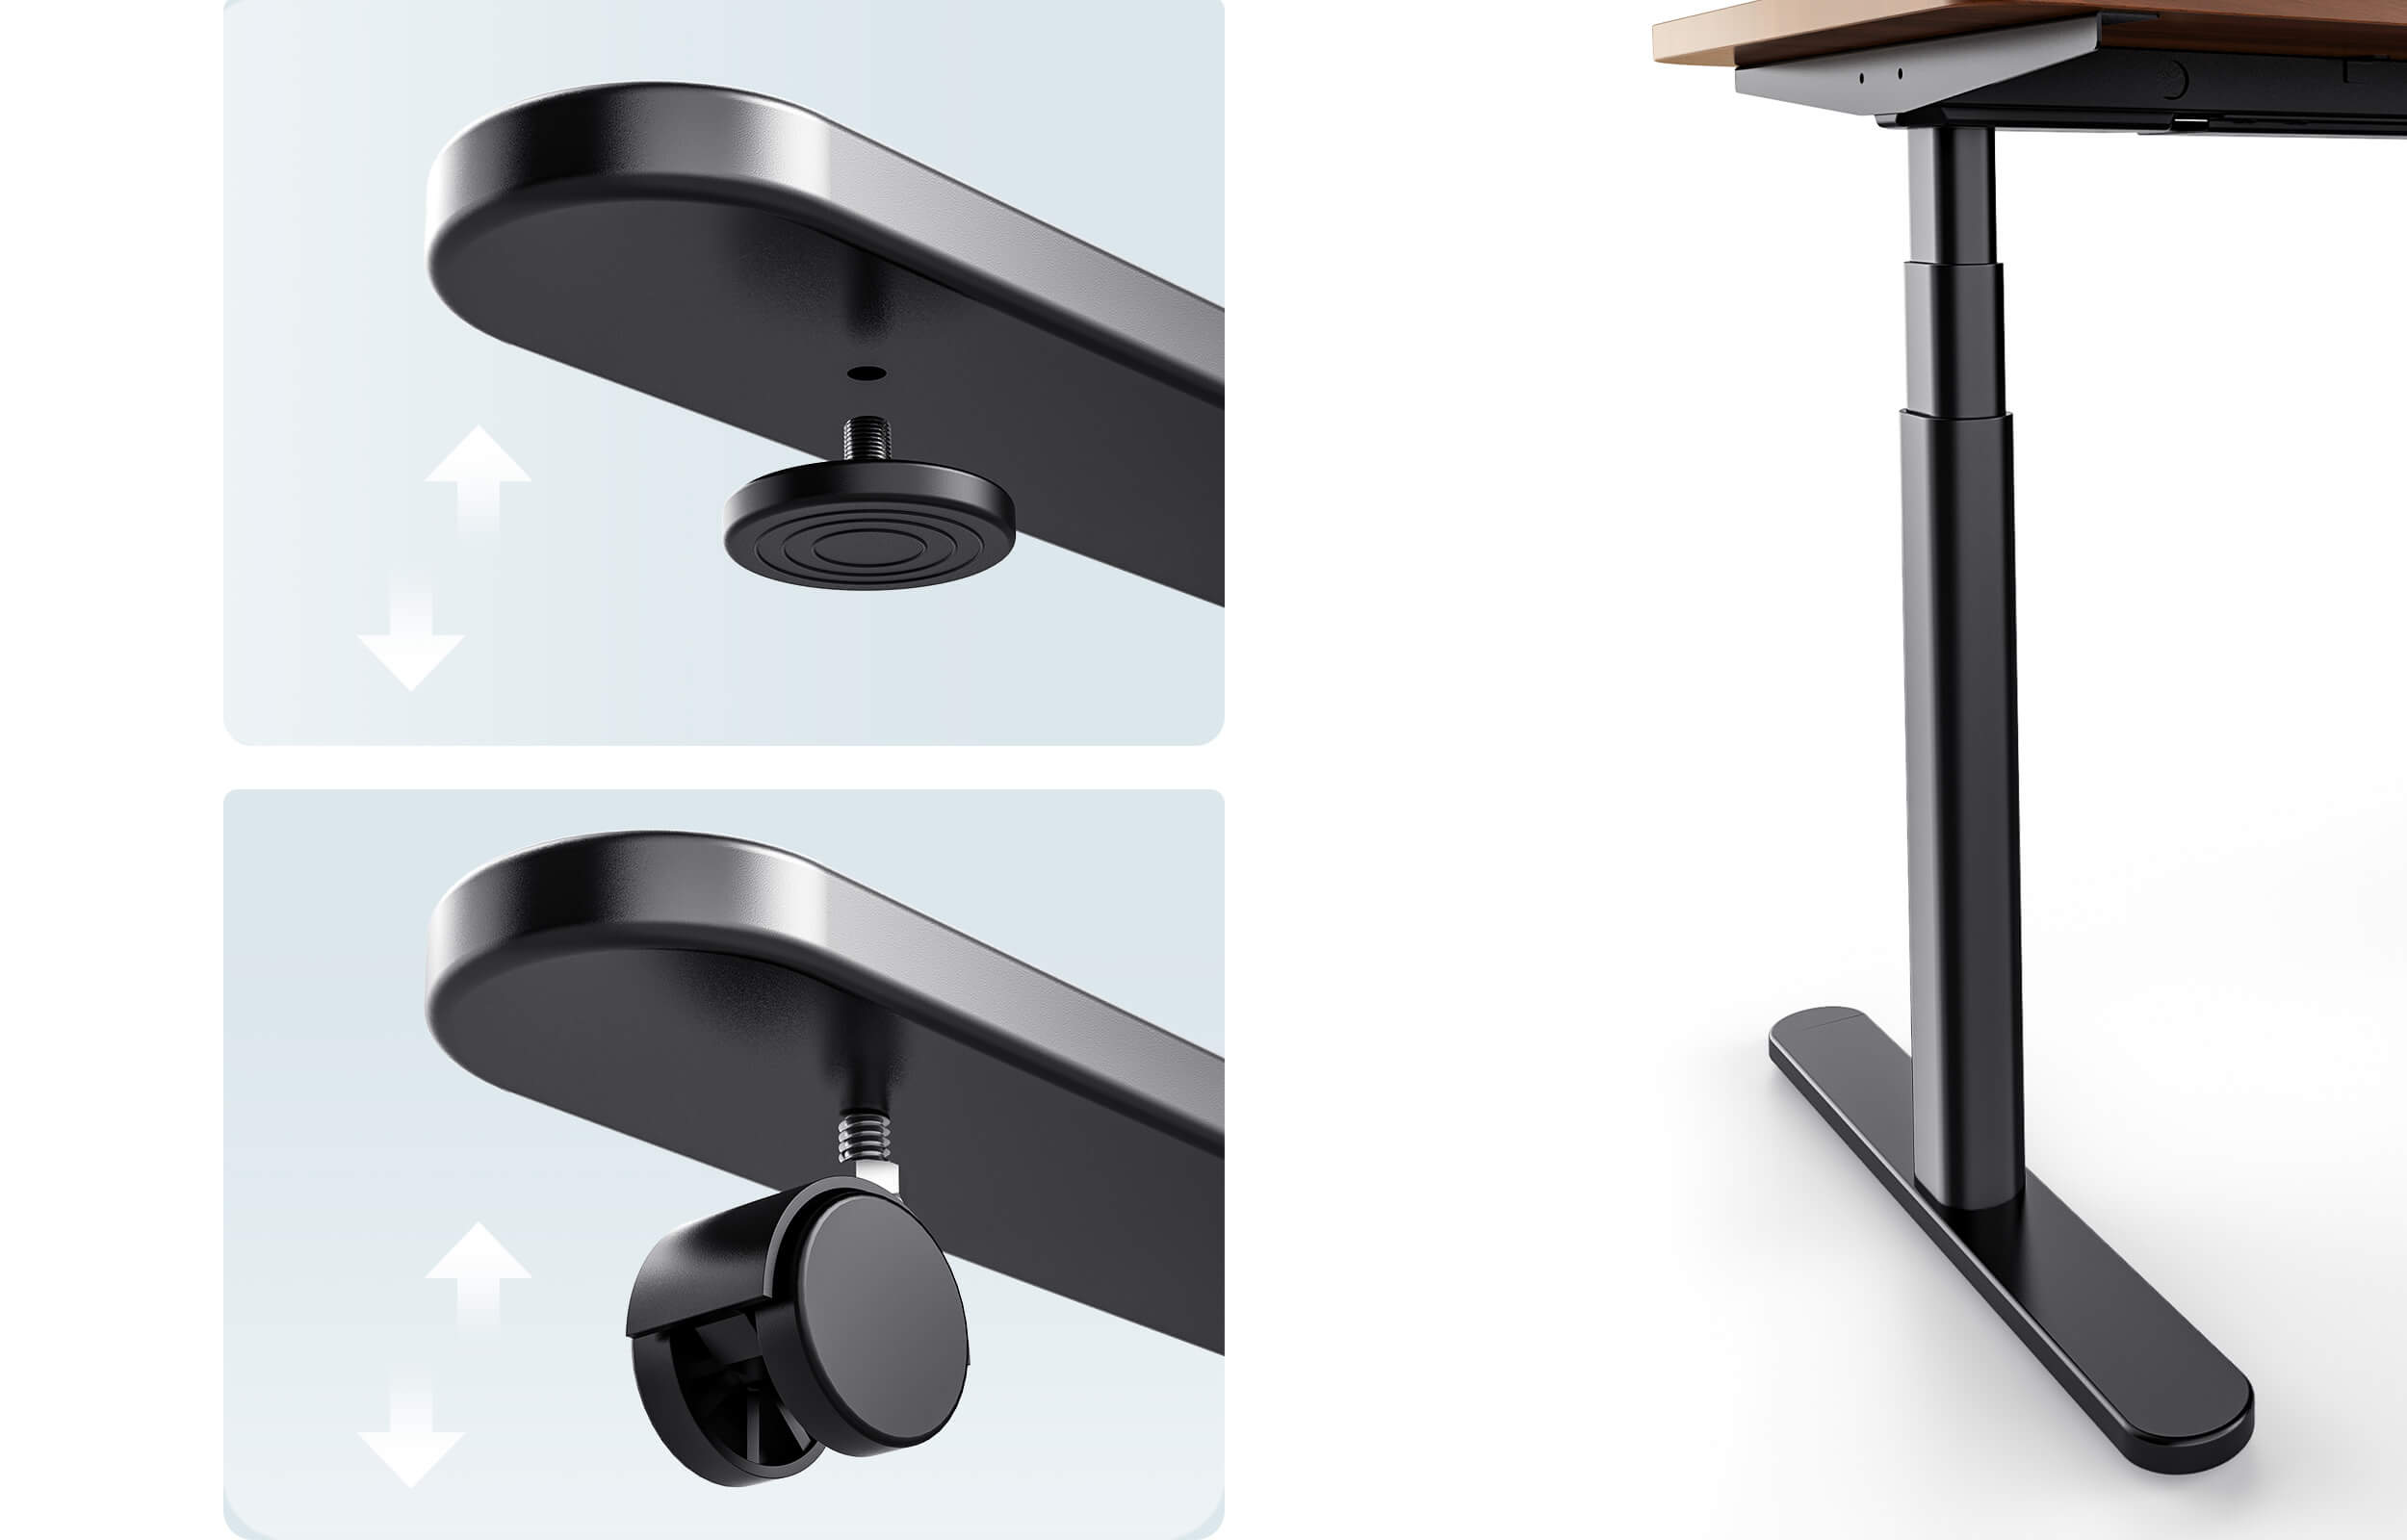 TH2 Pro Plus electric standing desk with castors are easy to move